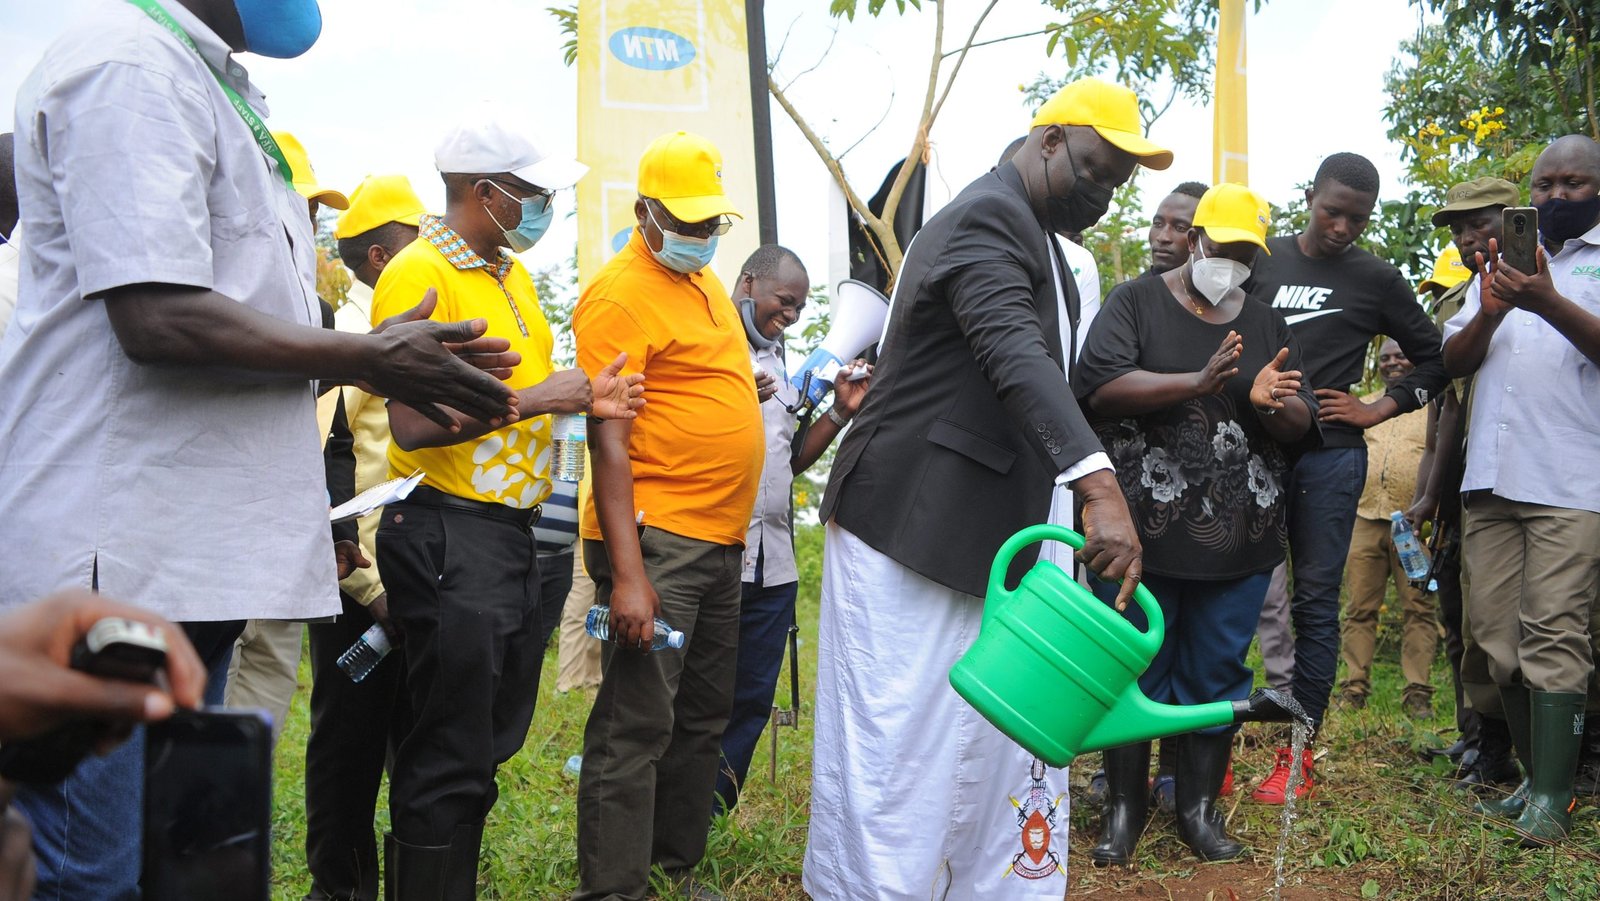 mtn-uganda’s-‘uganda-is-home’-campaign-revitalizes-220-hectares-of-forest-cover